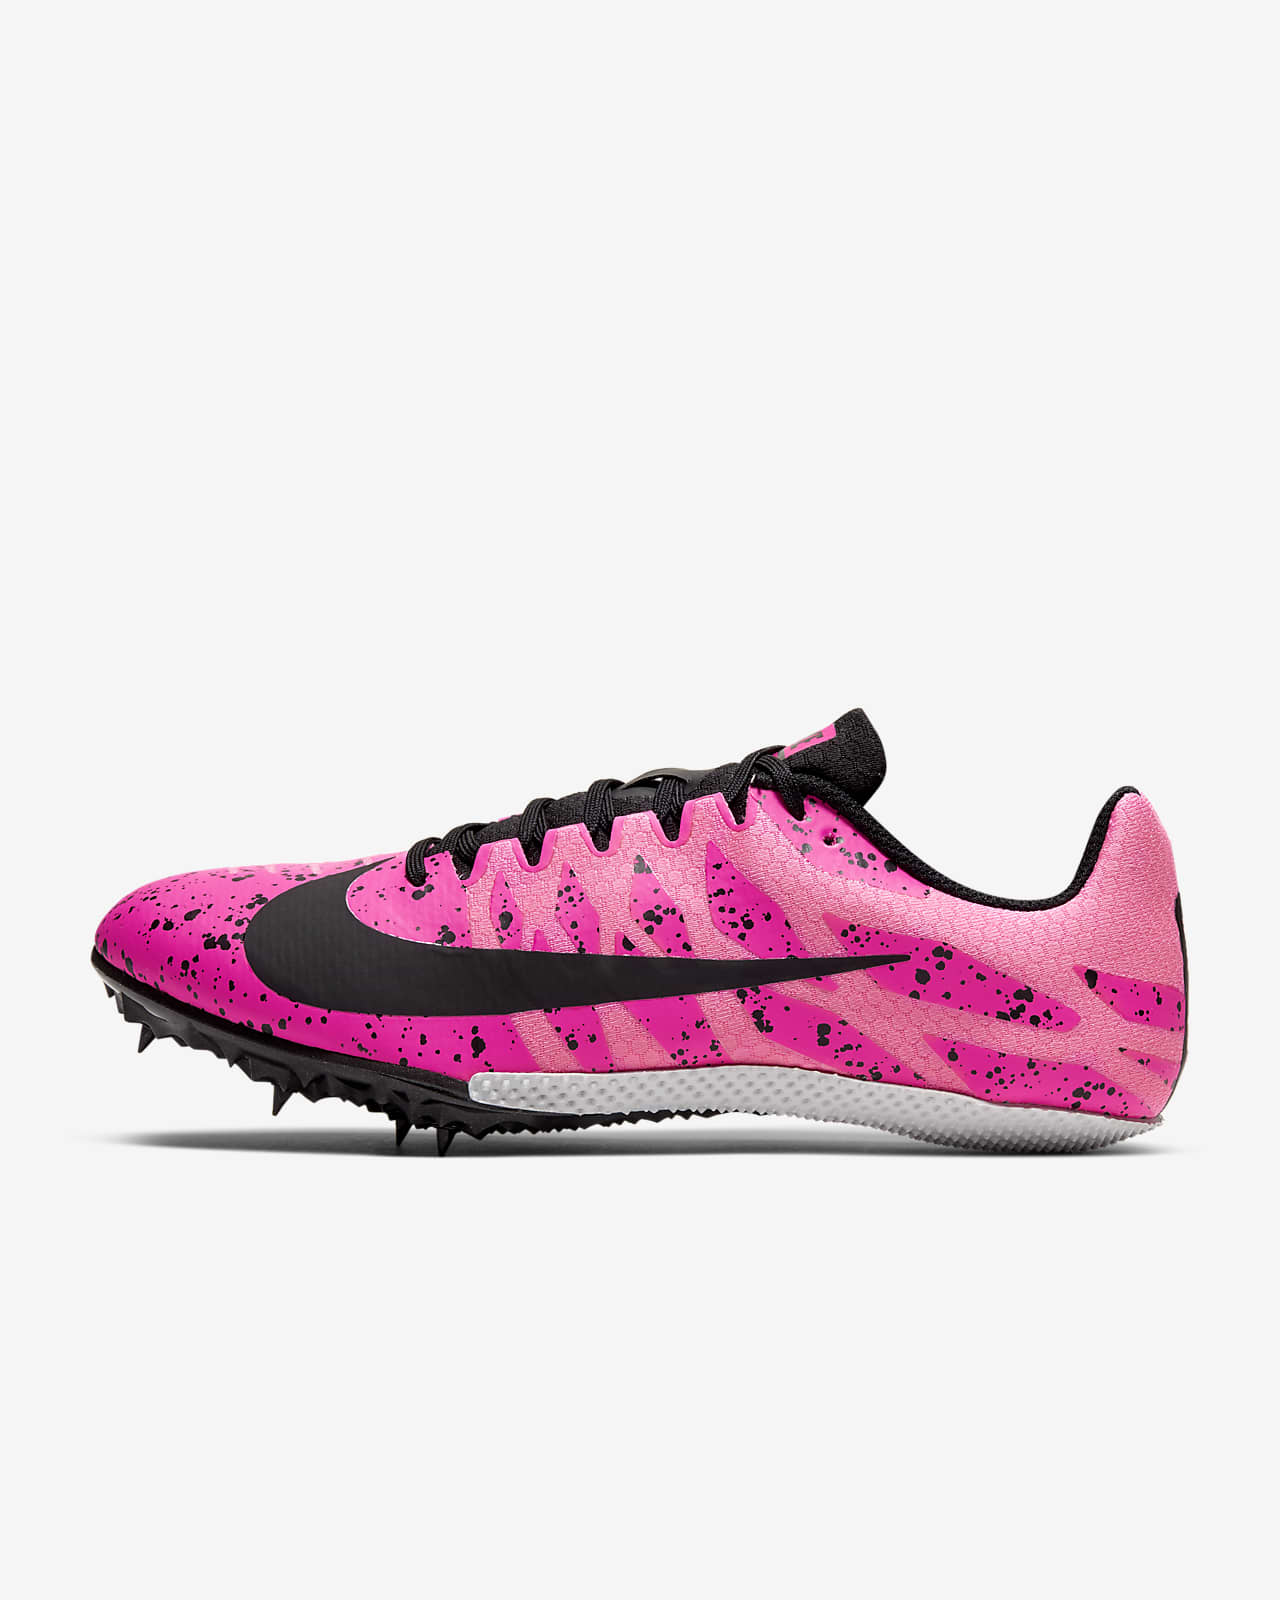 nike zoom rival s 9 spike size